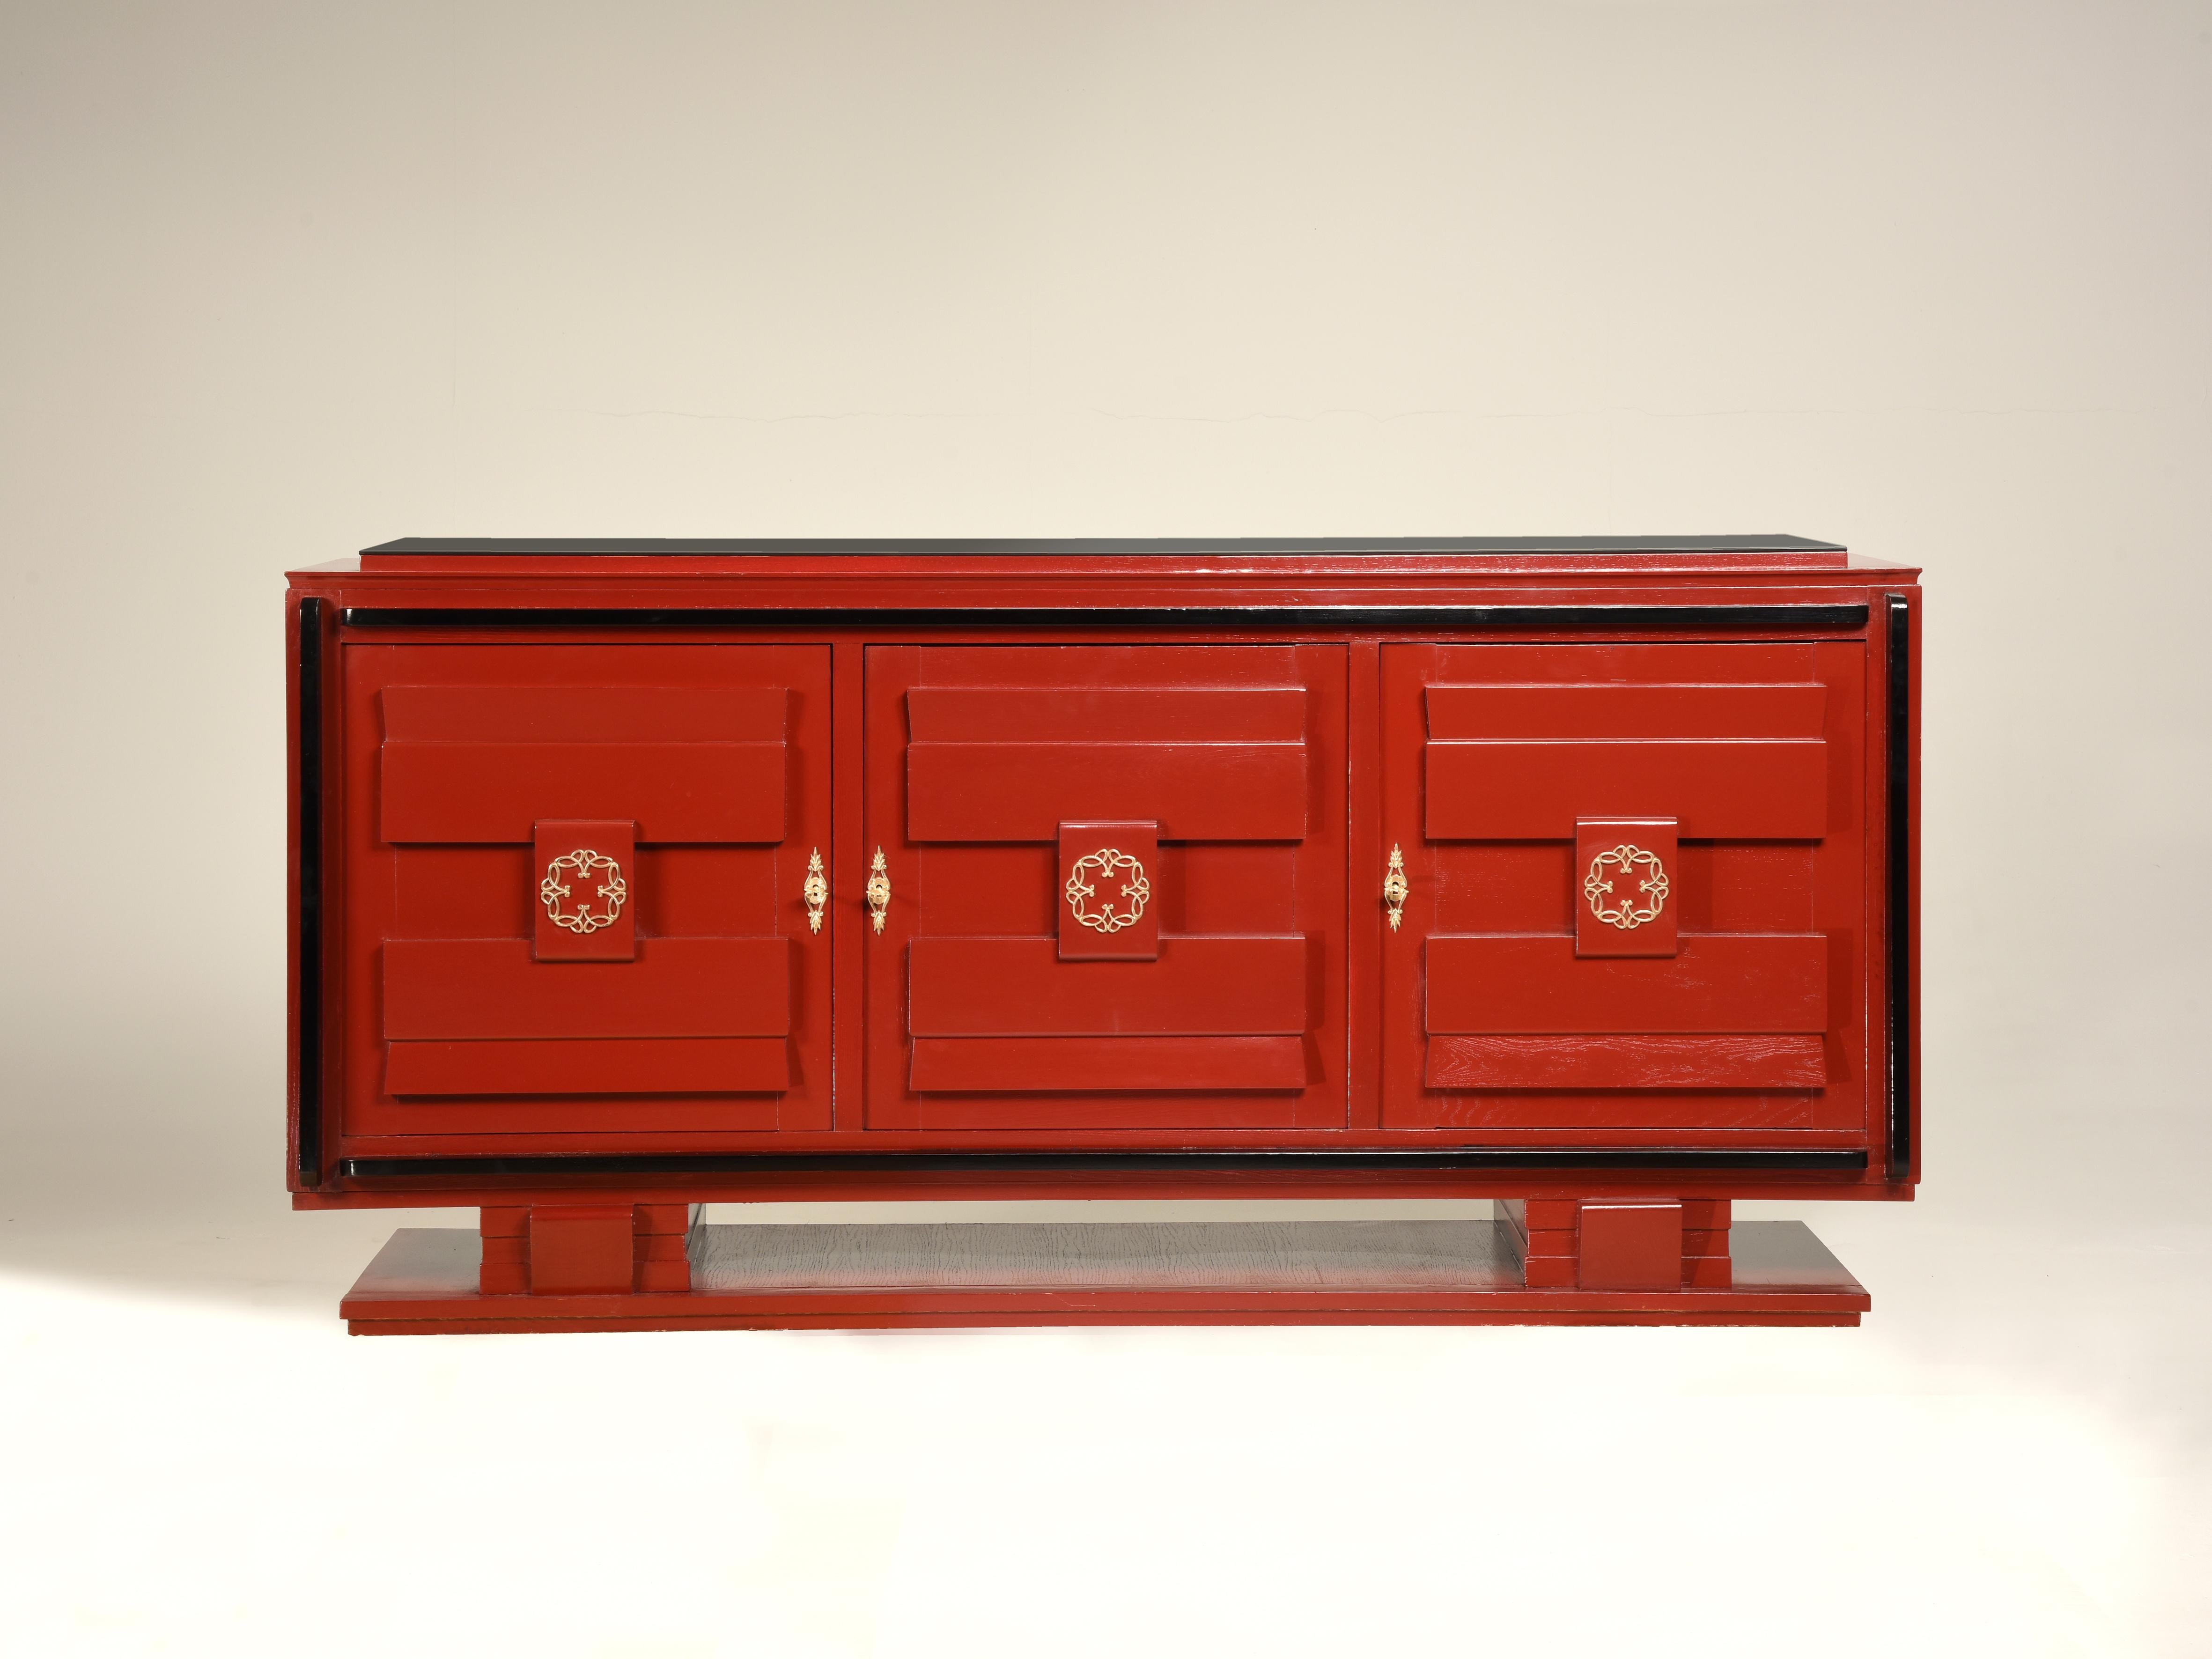 French 1940s Art Deco style red lacquered and black details and top credenza

French Art Deco sideboard. Red lacquer and black ebonized details. Three doors and brass hardware. Internally the doors are arranged with shelves and one drawer. The top